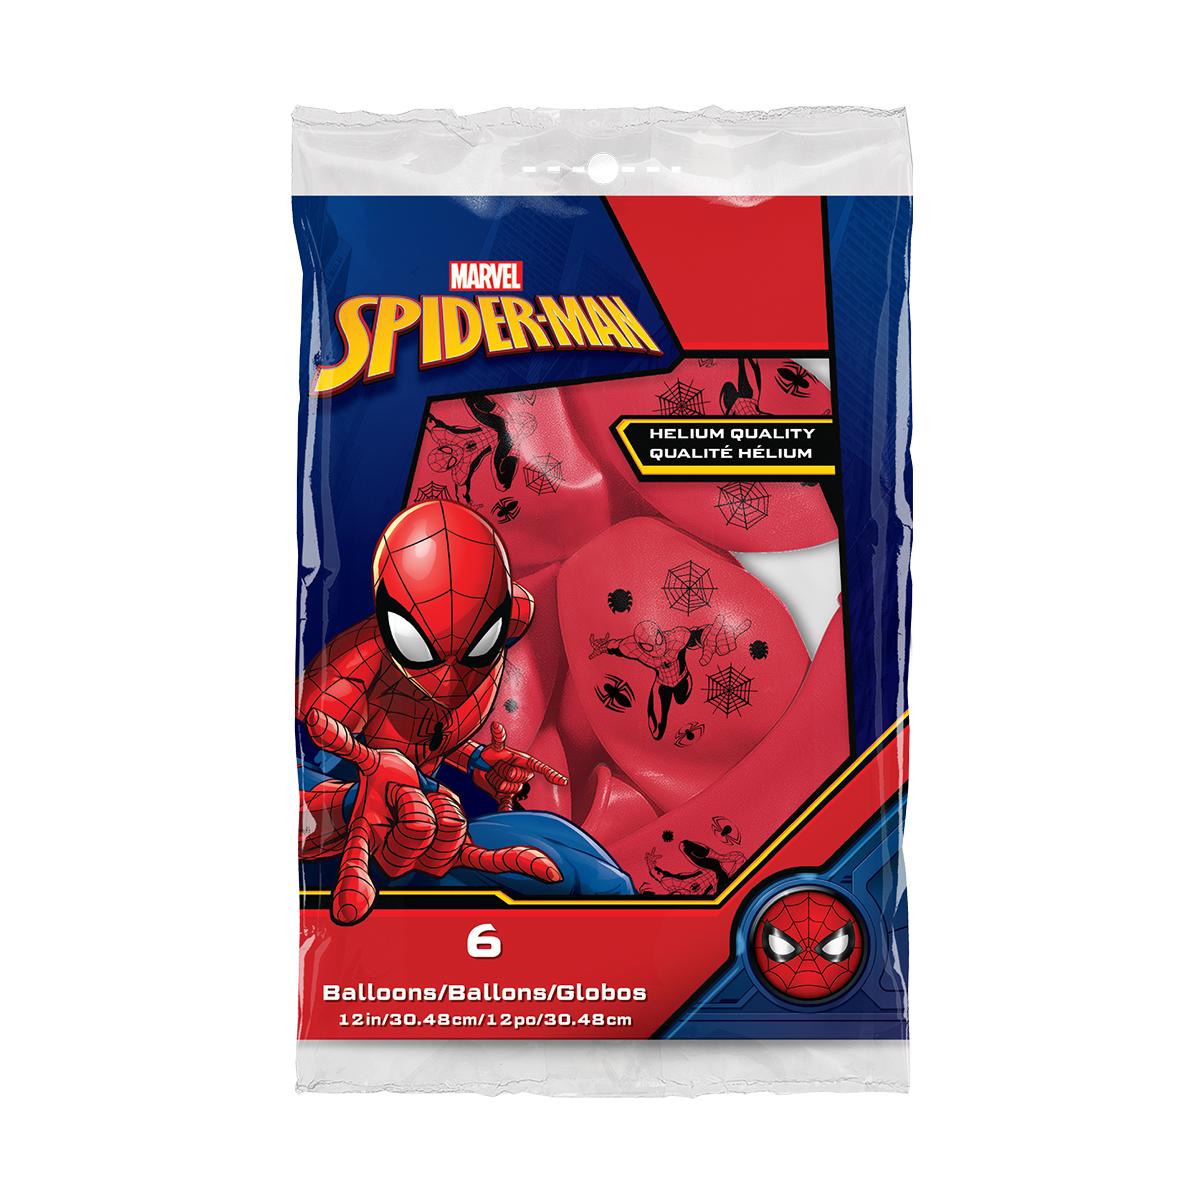 Image Of Packet Of 6 Disney Spiderman Latex Balloons